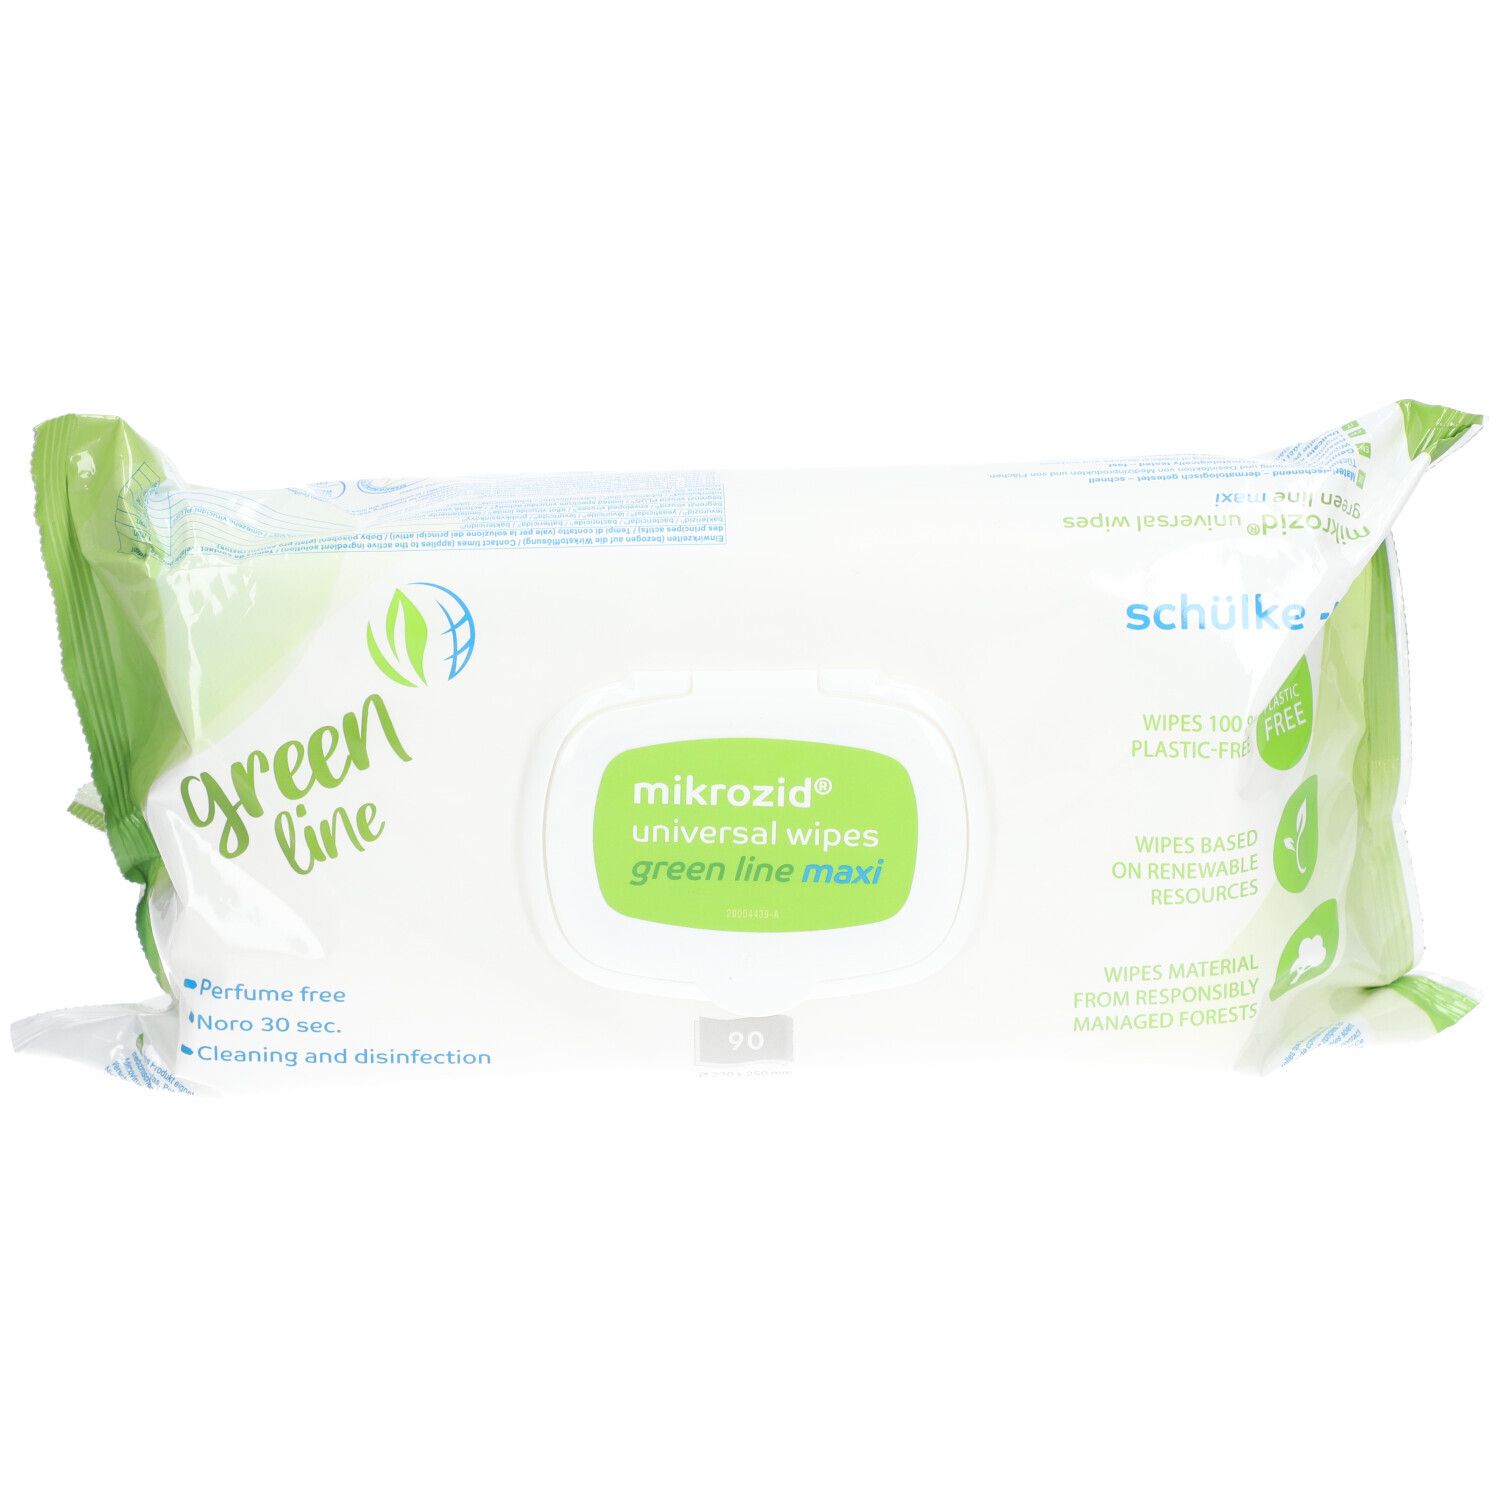 microcid® Universal Wipes Green Line